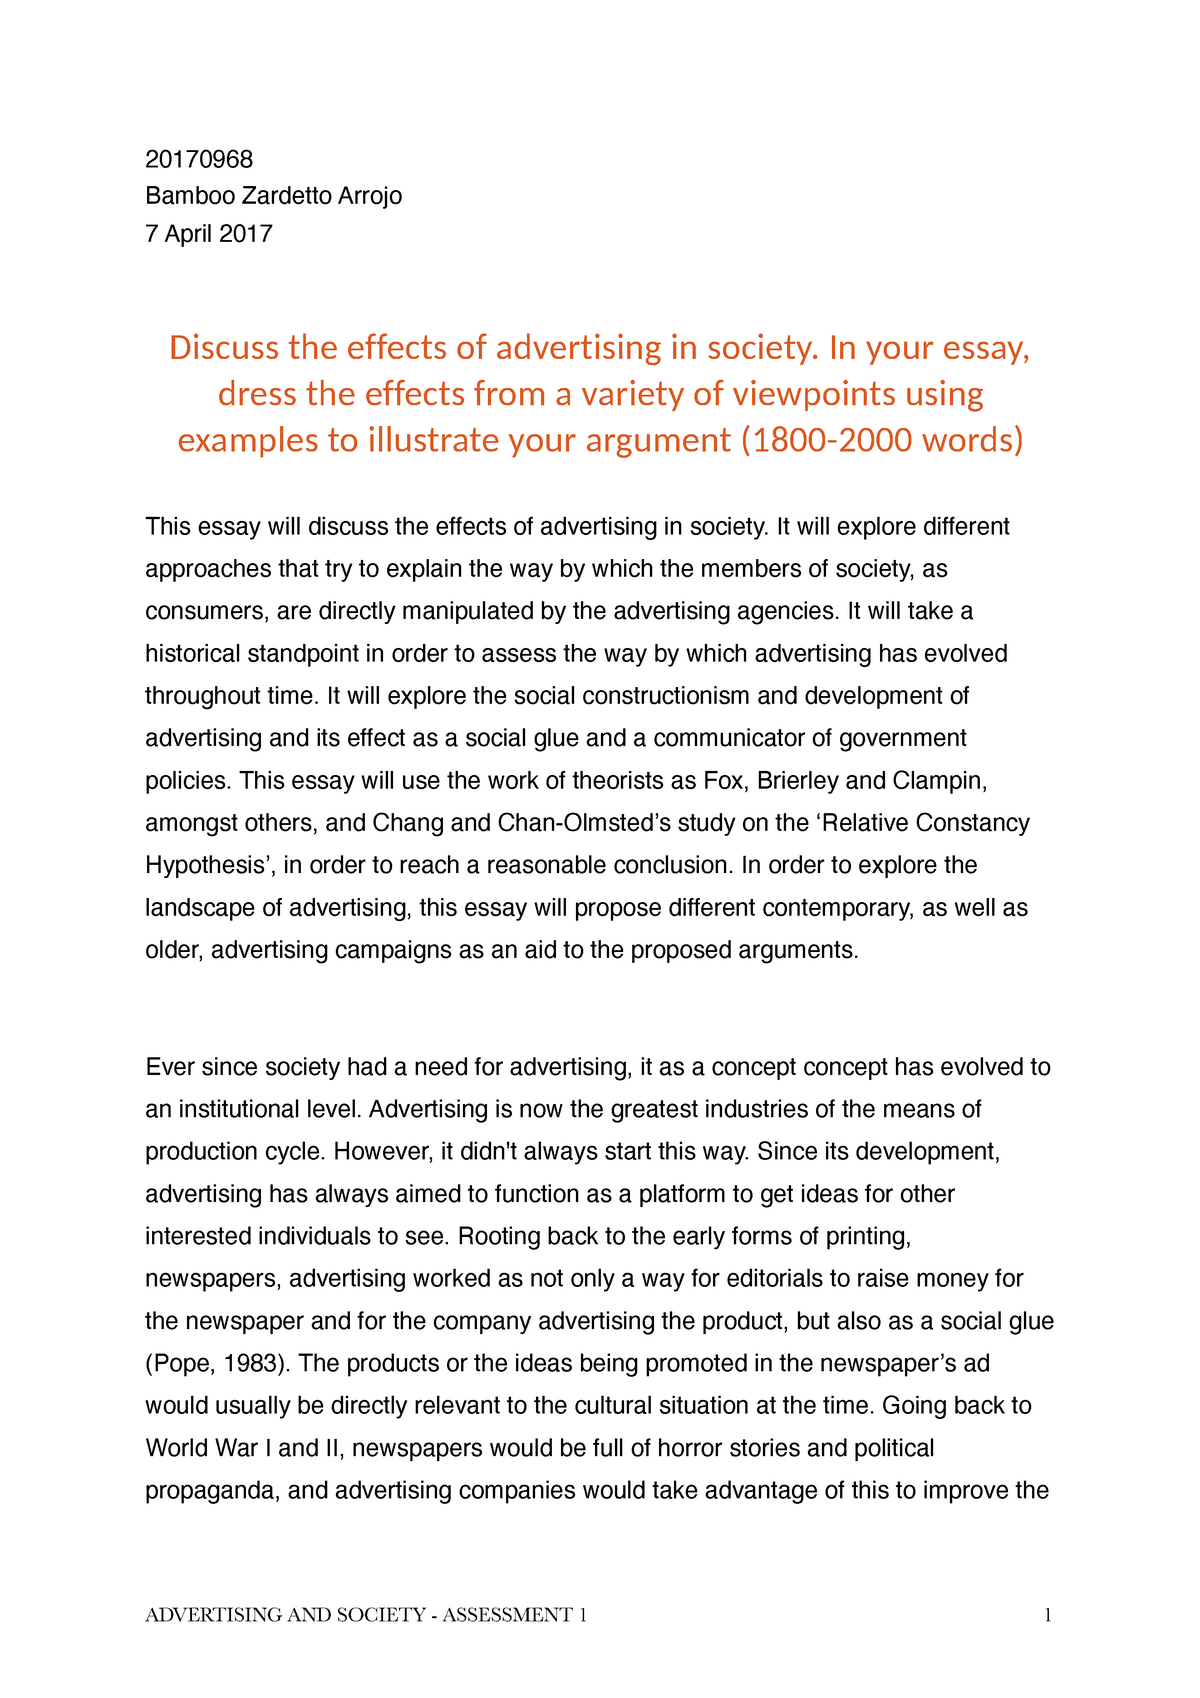 effects of advertising essay